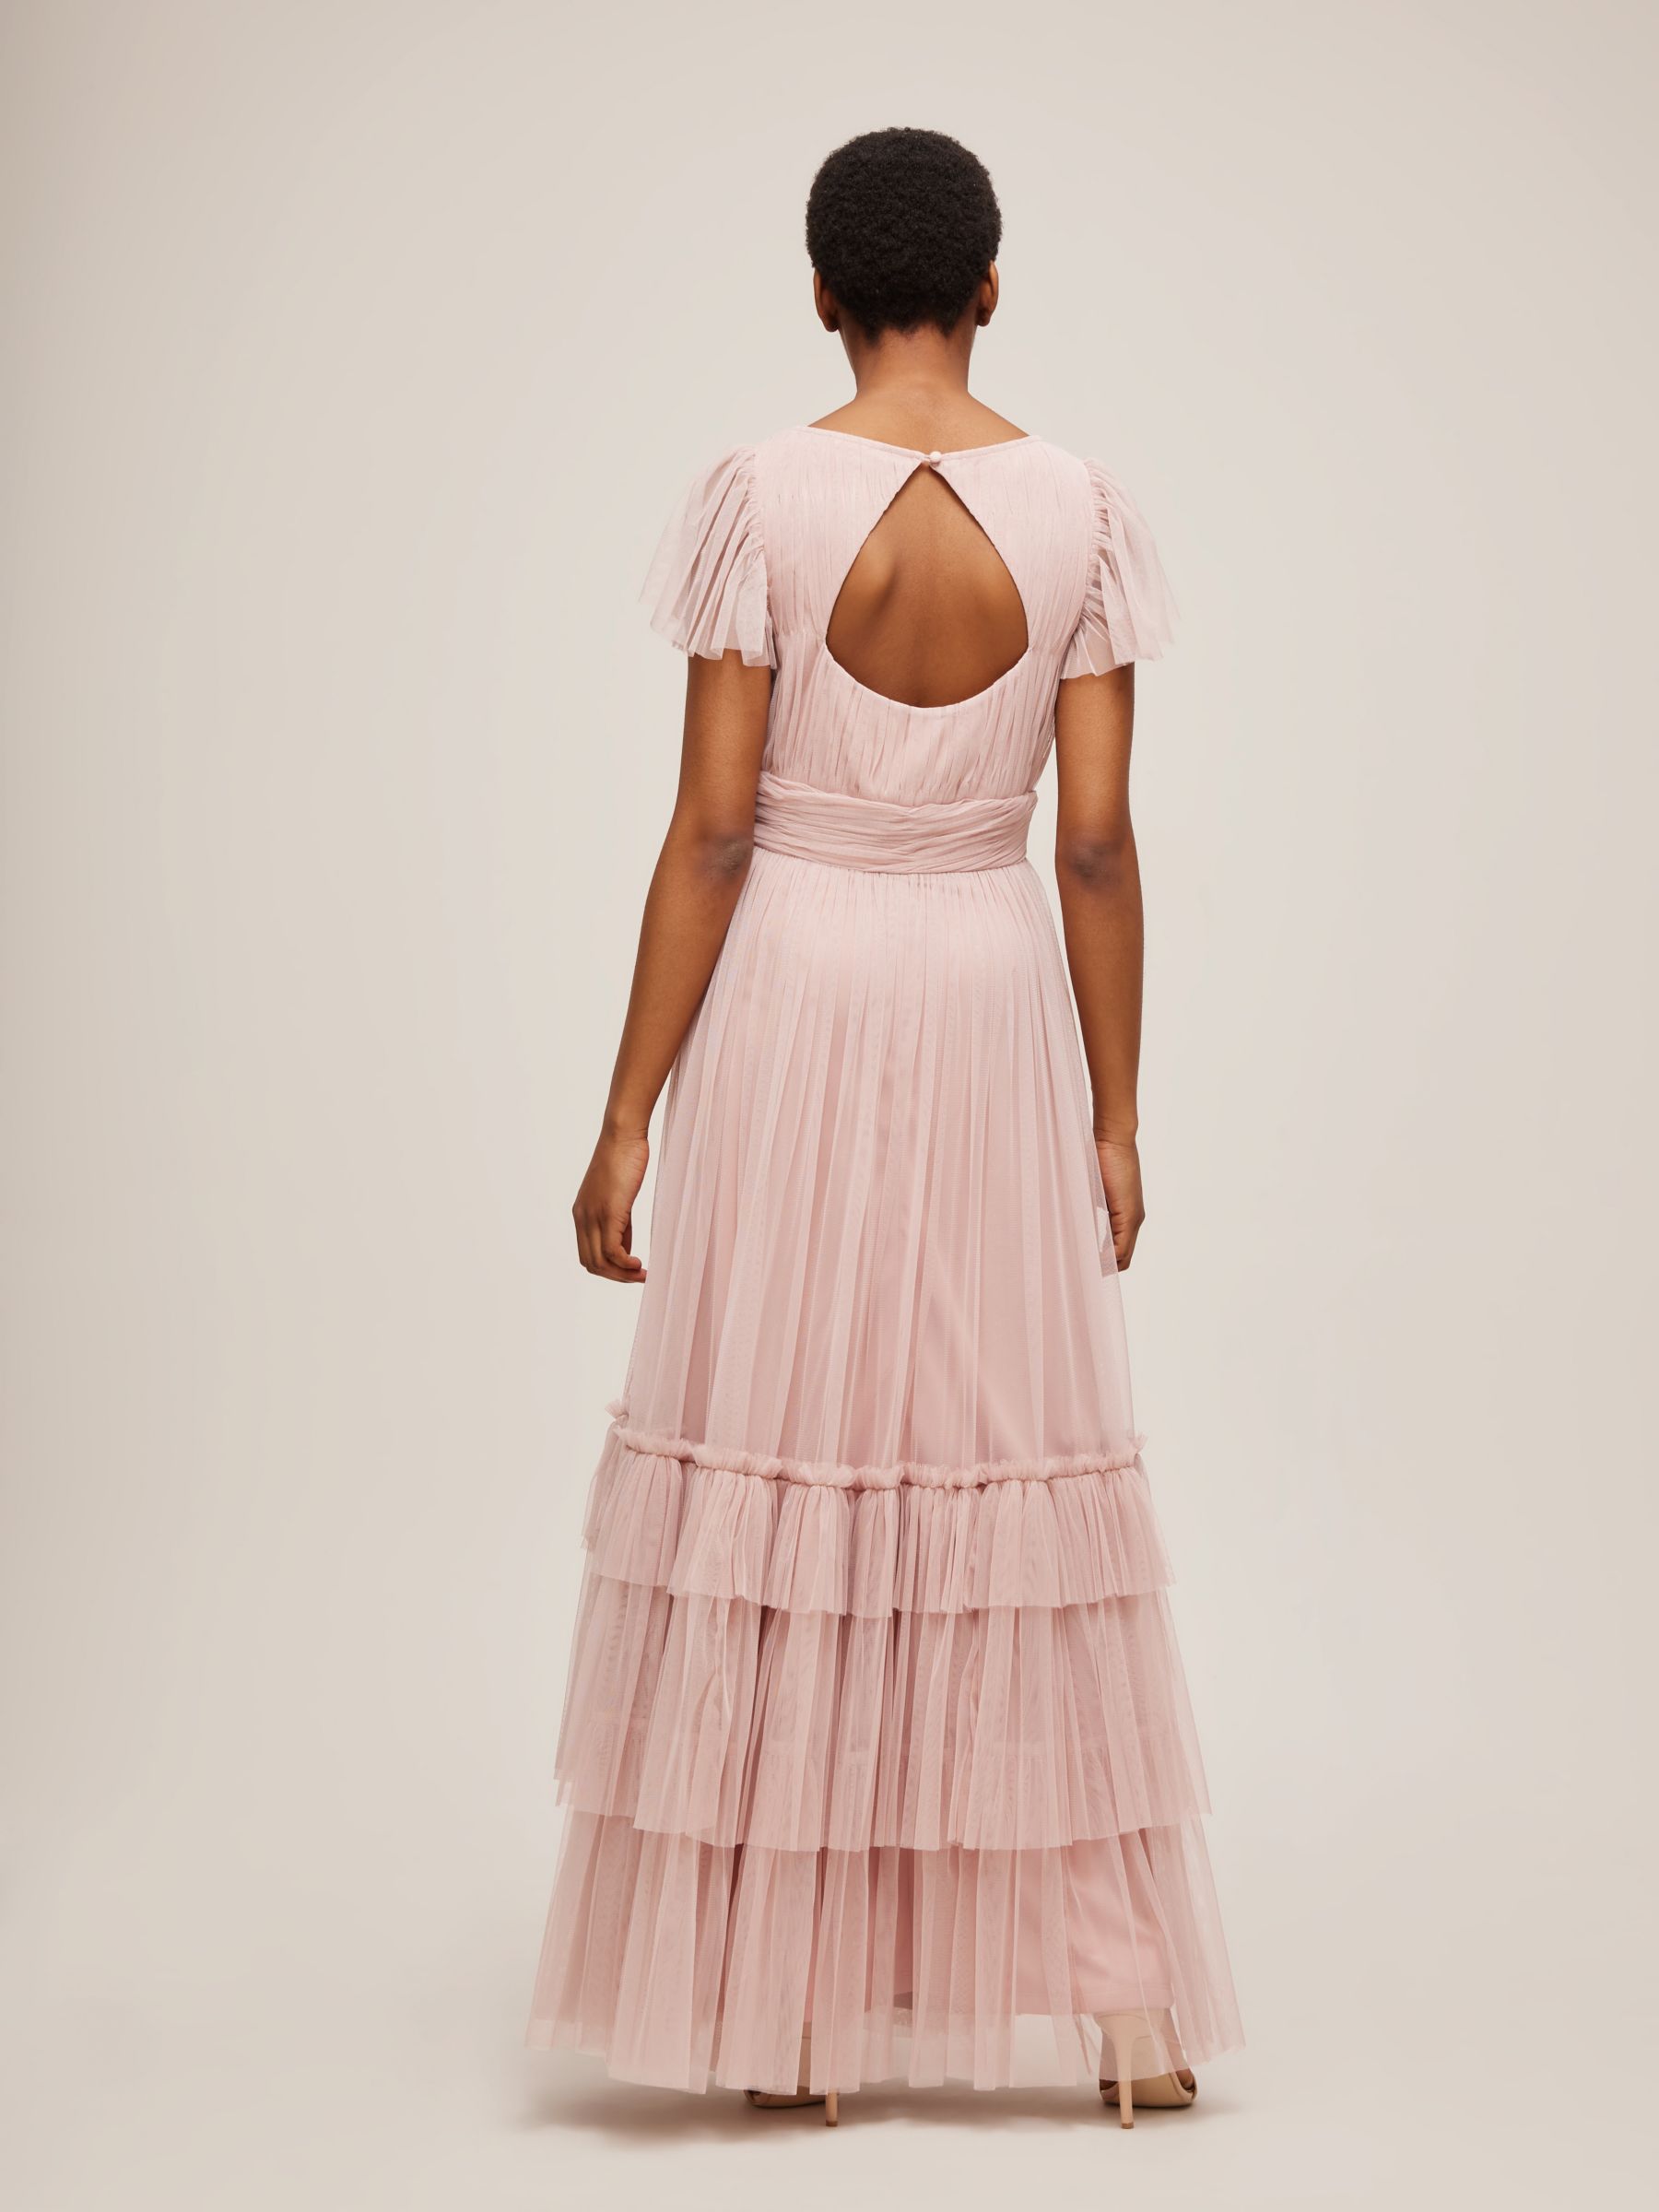 Buy Lace & Beads Diva Tiered Hem Maxi Dress Online at johnlewis.com